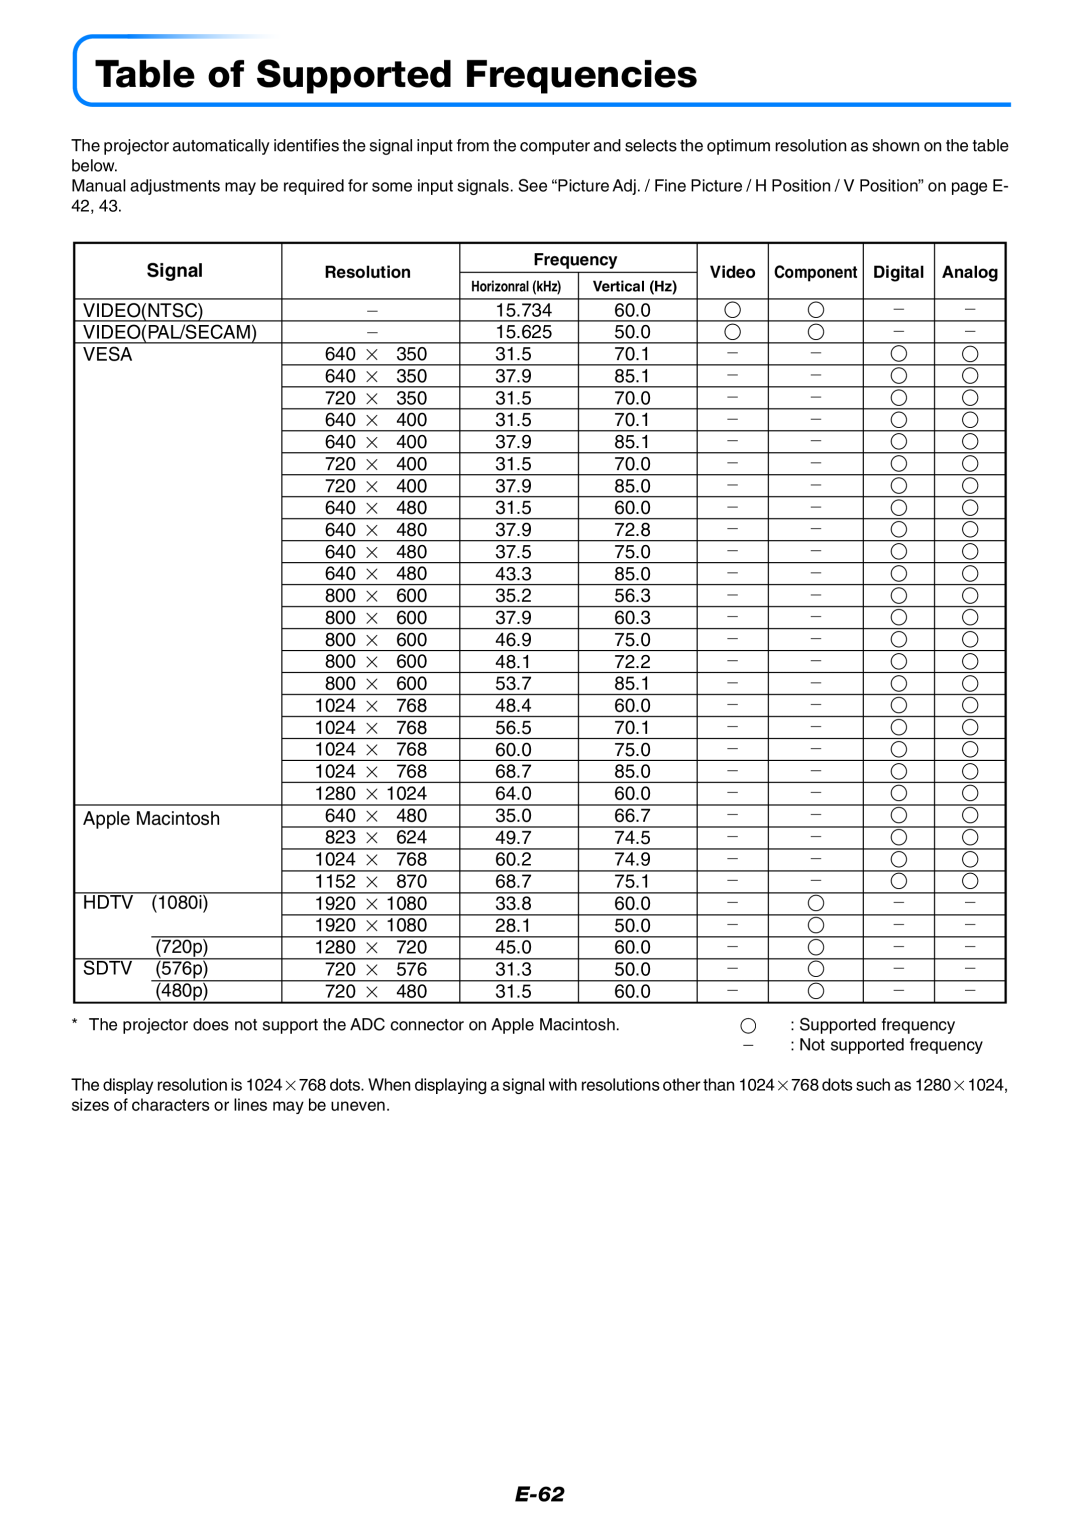 Mitsubishi Electronics XD60U user manual Table of Supported Frequencies, E-62, Signal 